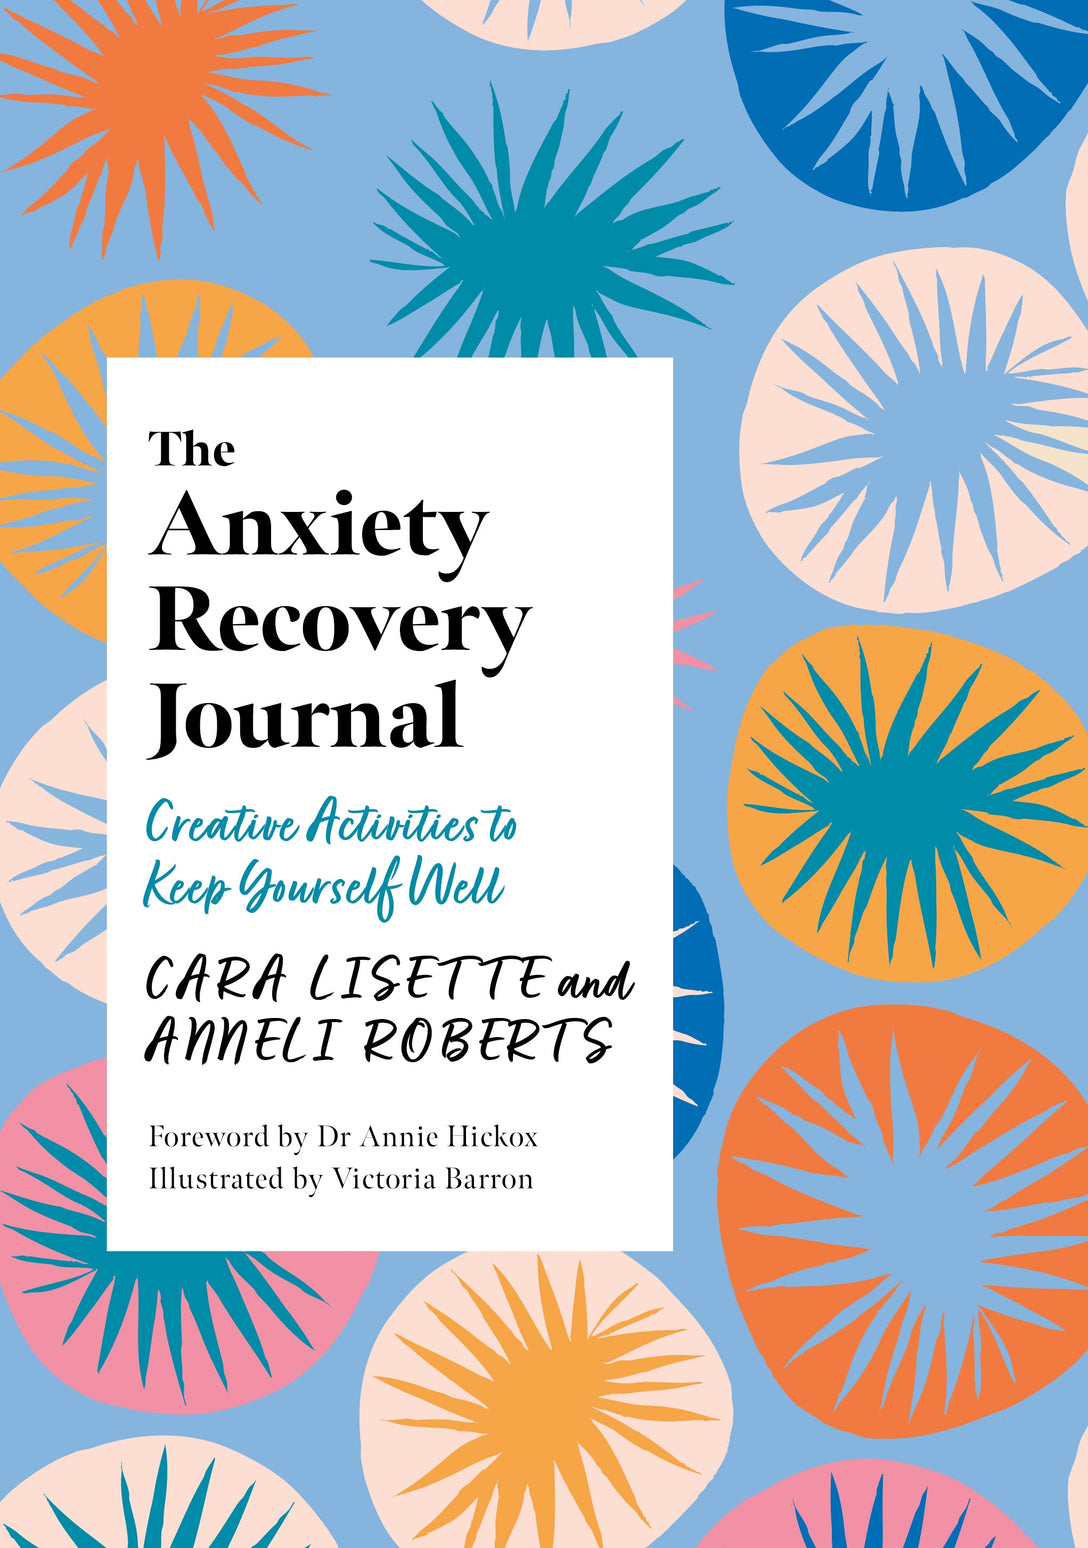 The Anxiety Recovery Journal by Victoria Barron, Annie Hickox, Cara Lisette, Anneli Roberts